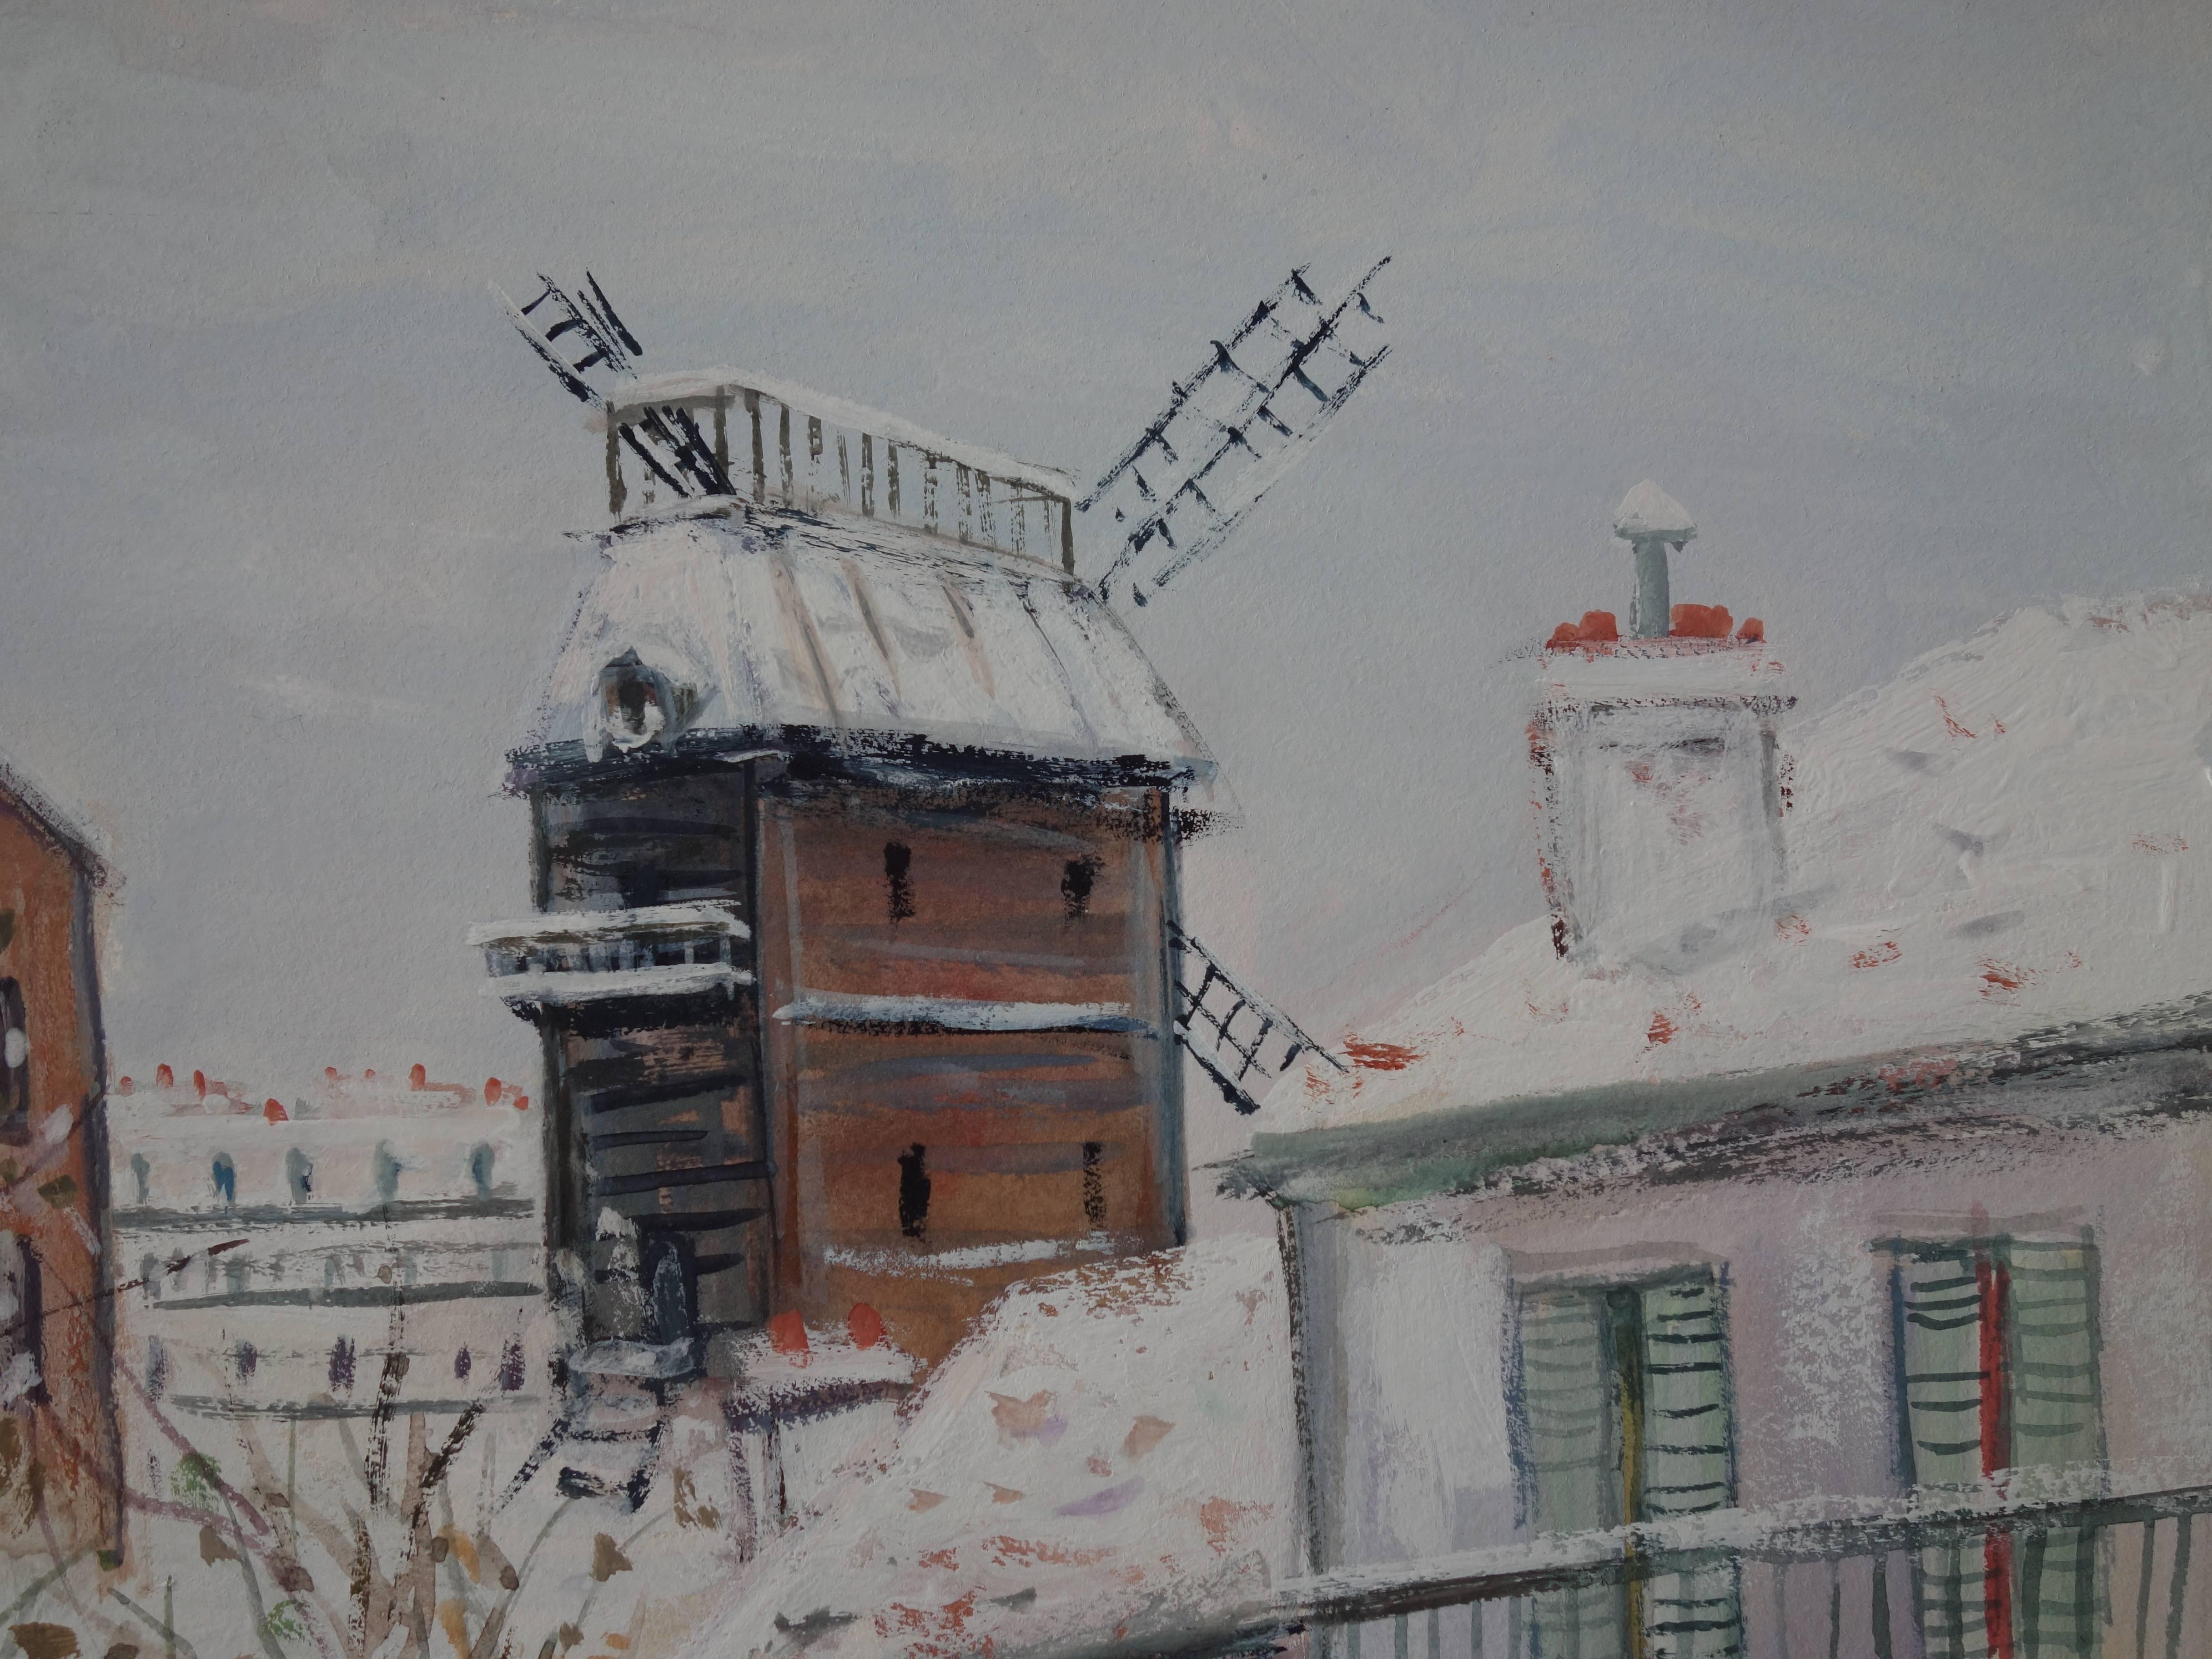 Paris : Winter Day at Montmartre - Original signed gouache painting - Cerificate - Realist Painting by Maurice Utrillo